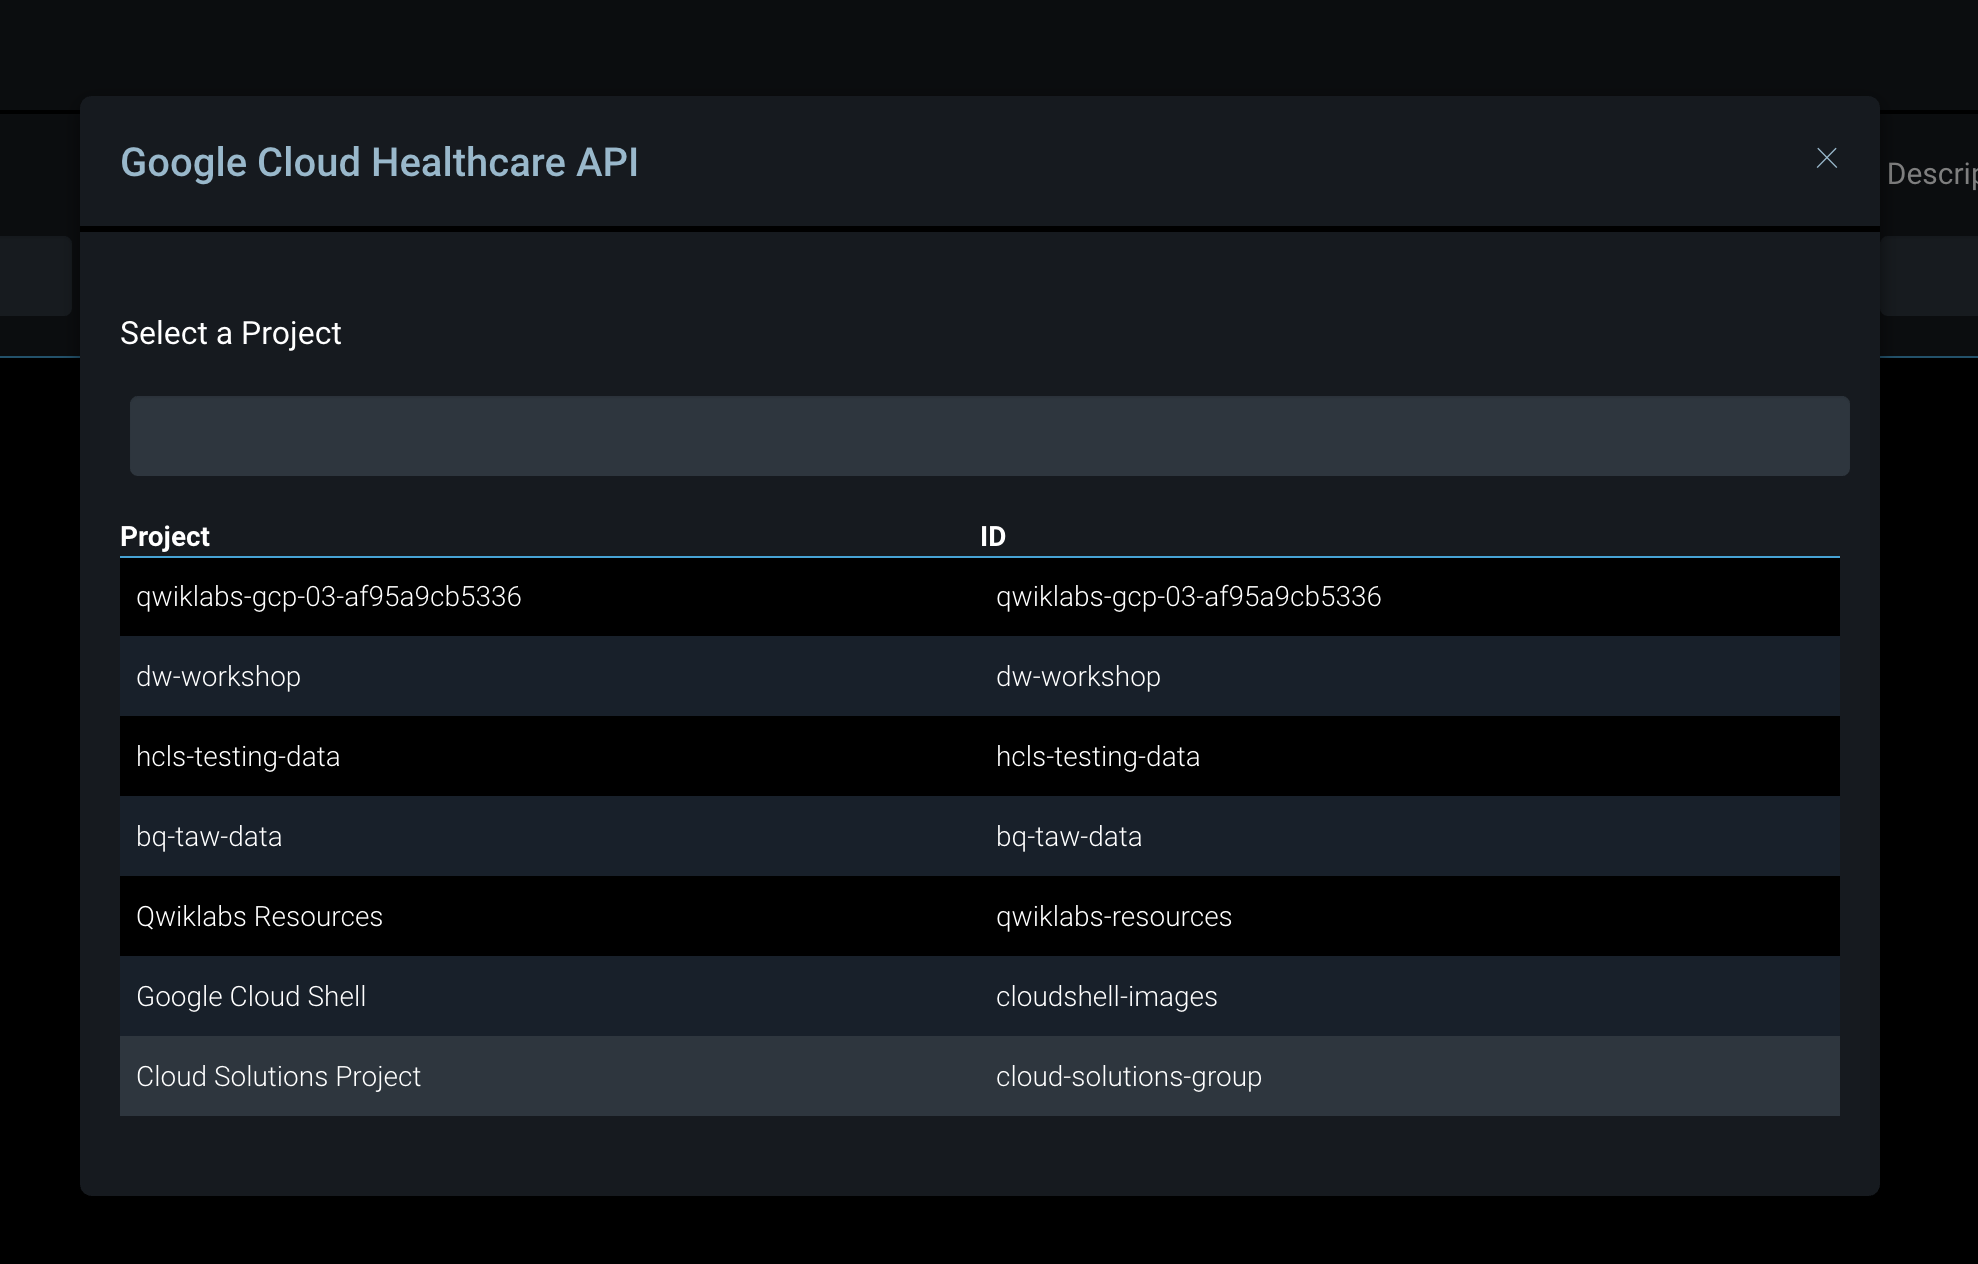 The Google Cloud Healthcare API window displaying the list of Projects and their IDs